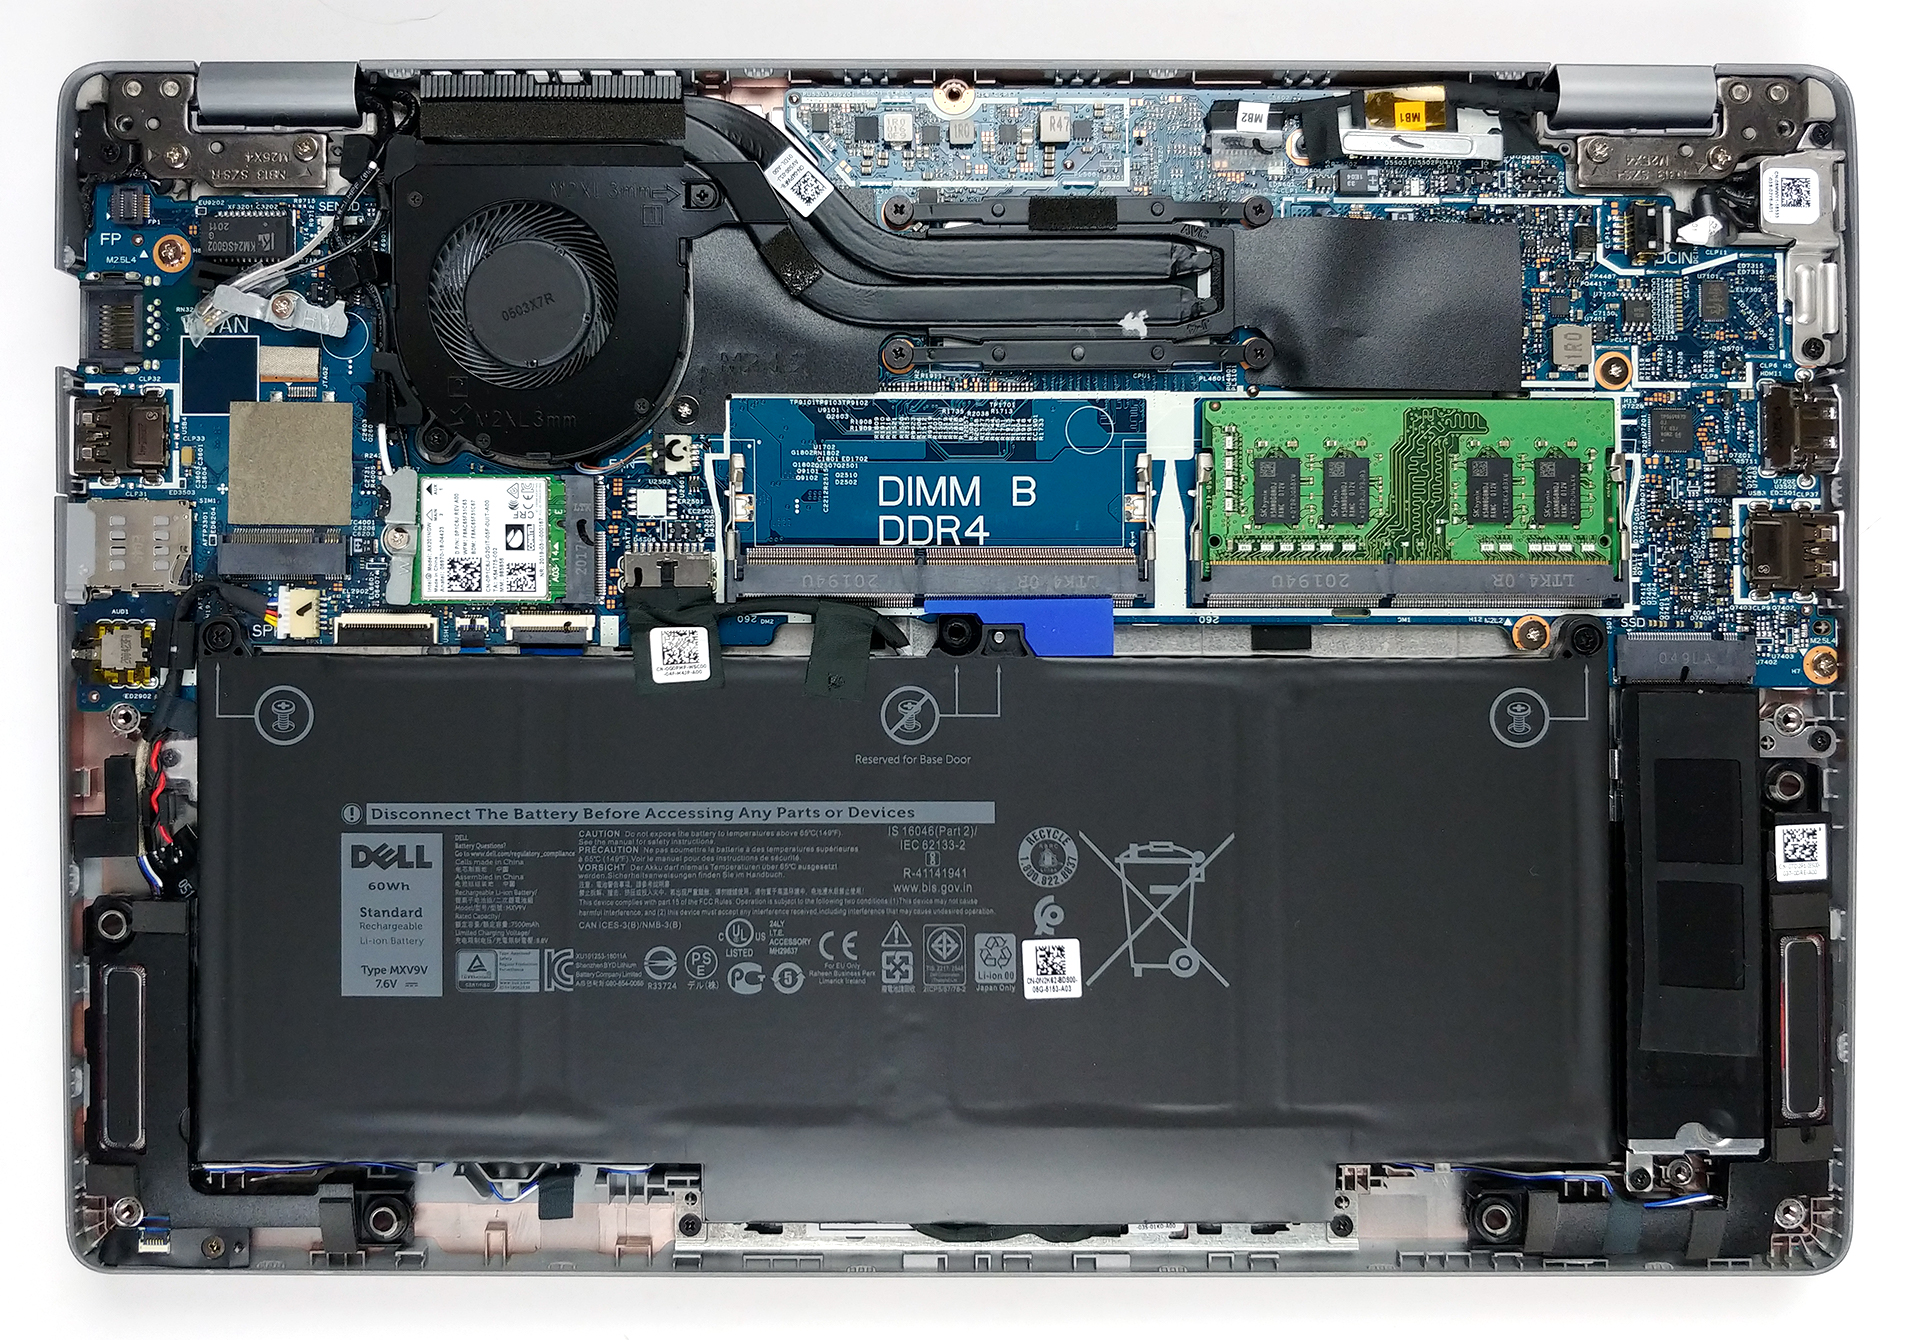 Inside Dell Latitude 13 5310 - disassembly and upgrade options ...